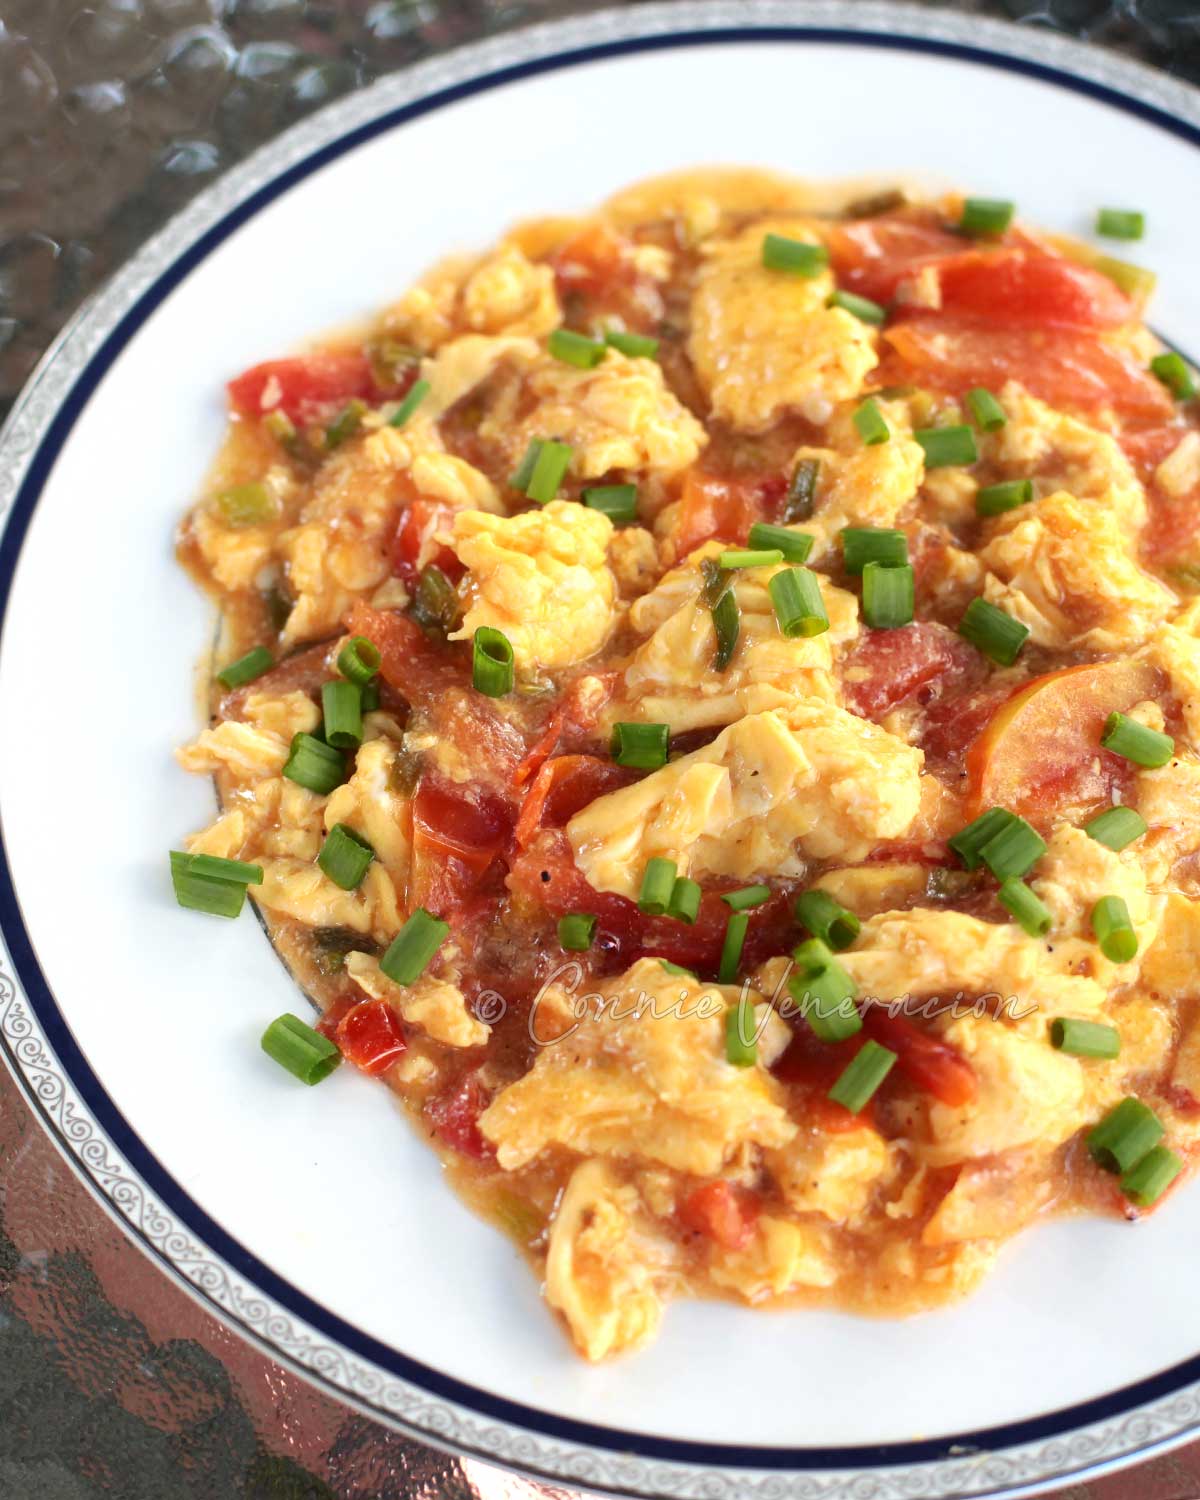 Chinese-style scrambled eggs with tomatoes